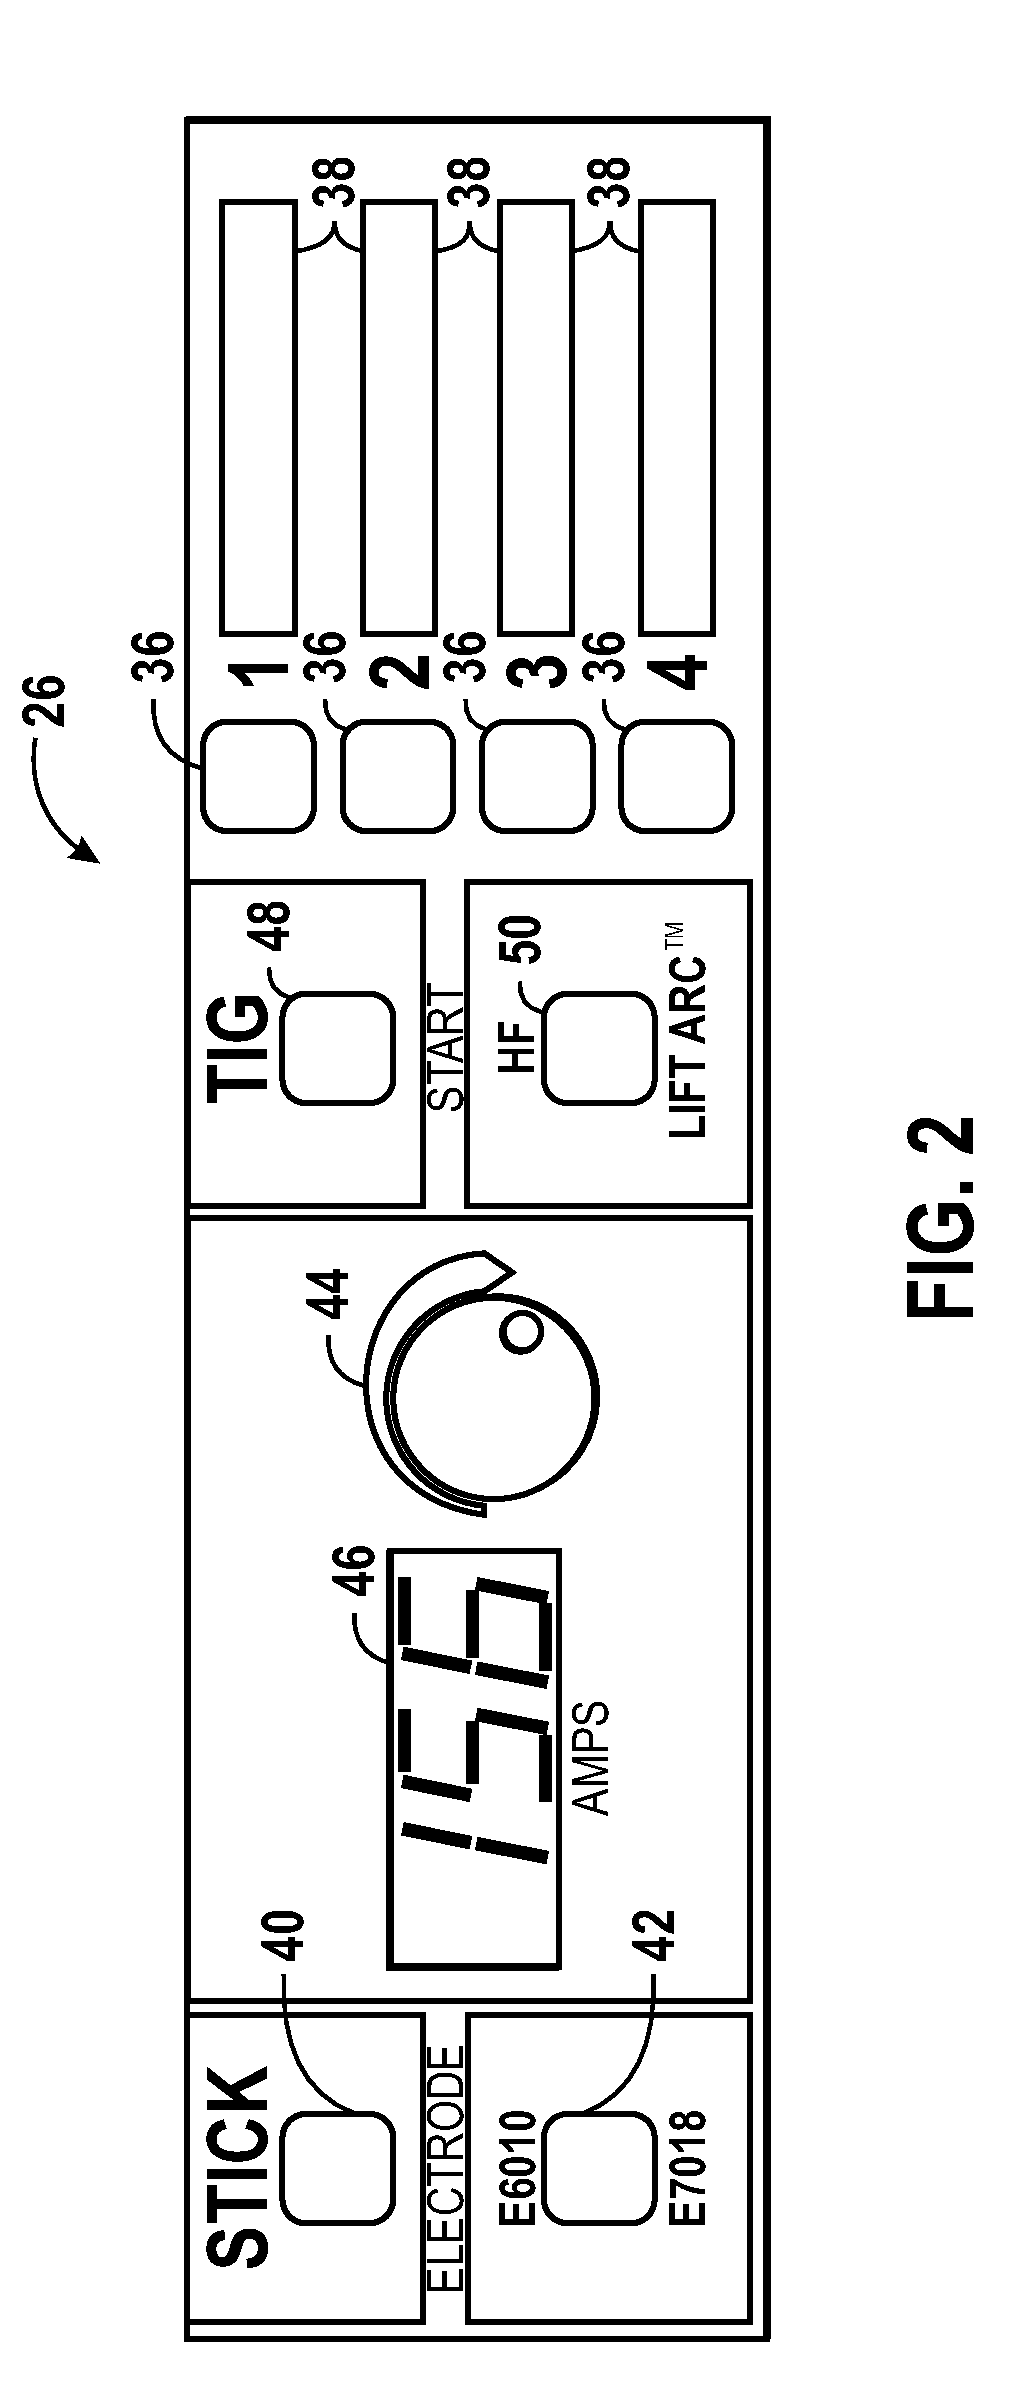 Personalized interface for torch system and method